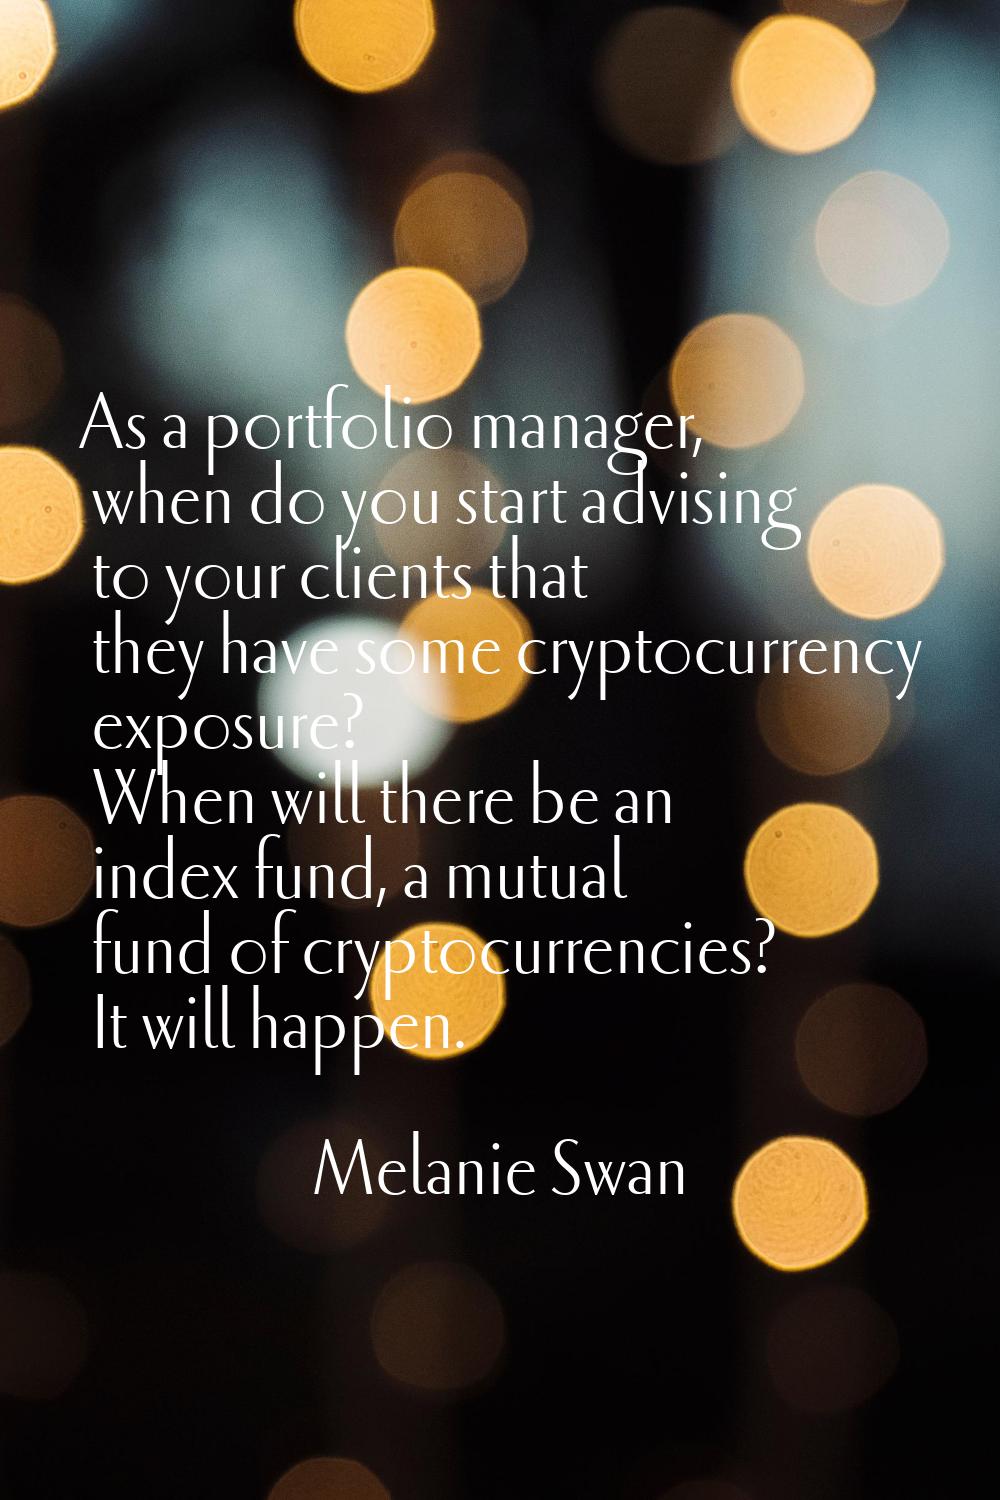 As a portfolio manager, when do you start advising to your clients that they have some cryptocurren